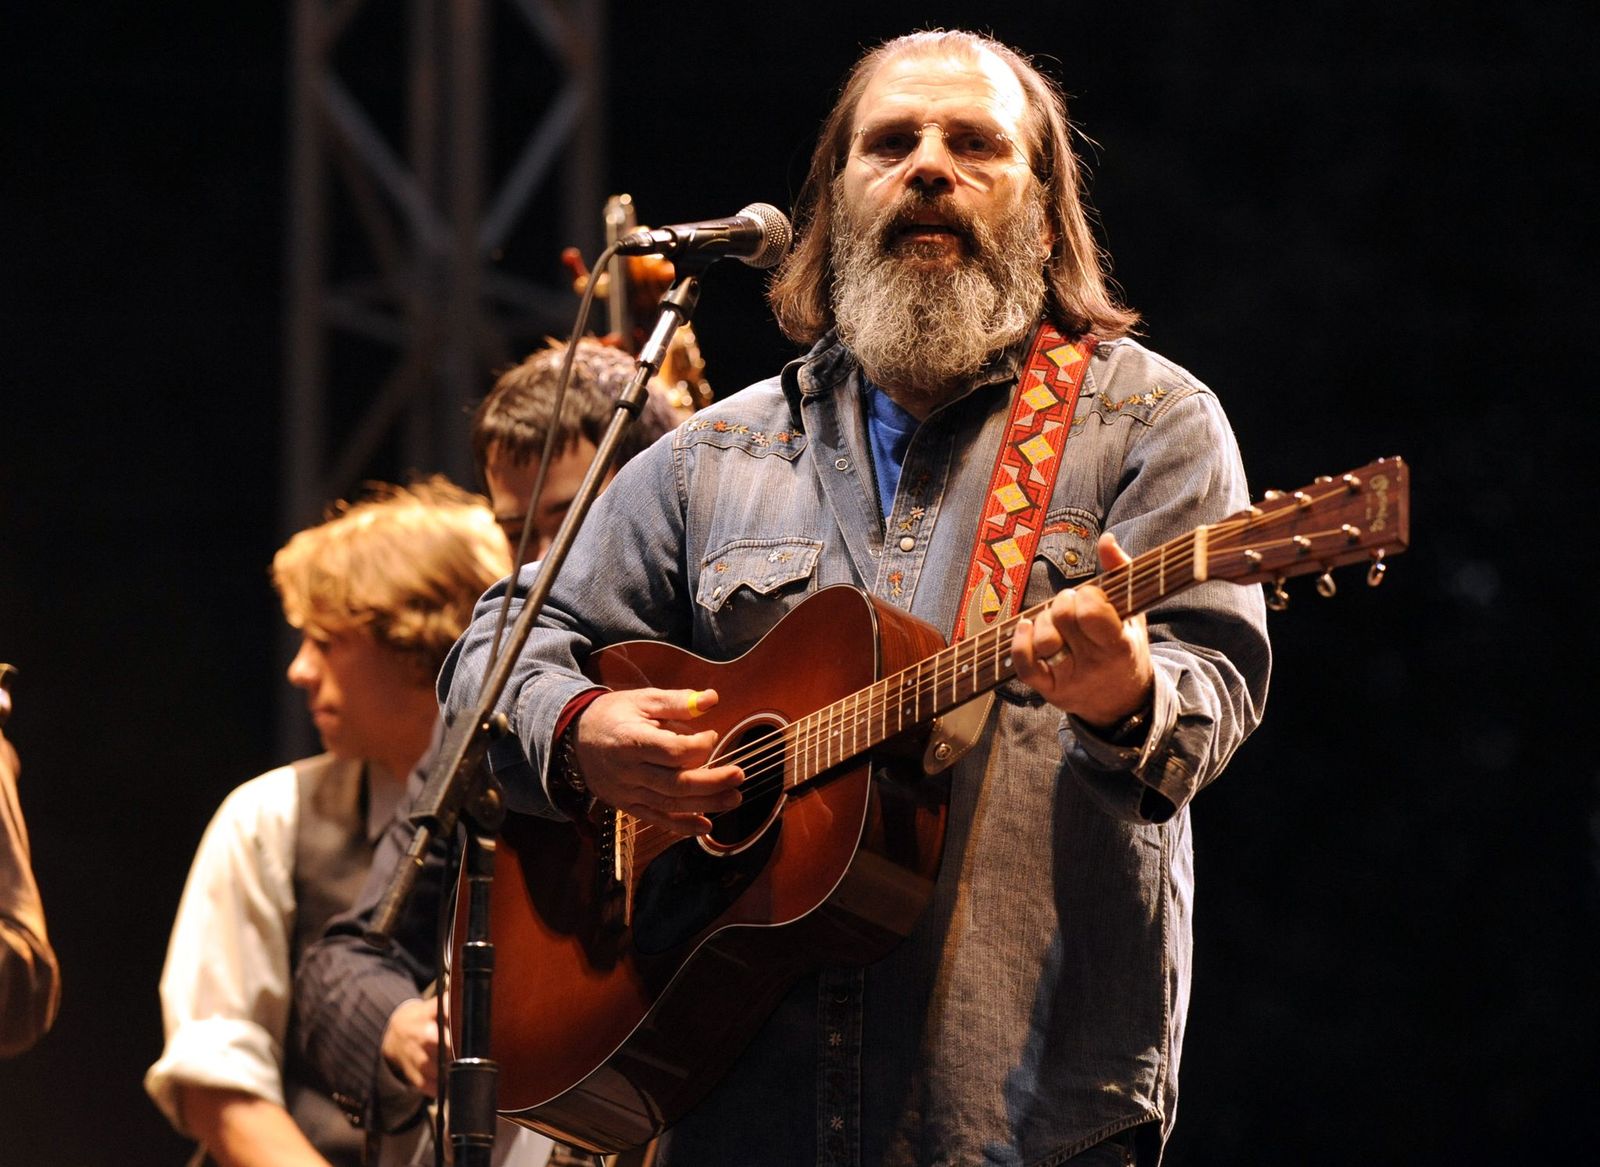 Steve Earle performs with T Bone Burnett and Friends as part of Hardly Strictly Bluegrass 10 on October 1, 2010 | Photo: Getty Images